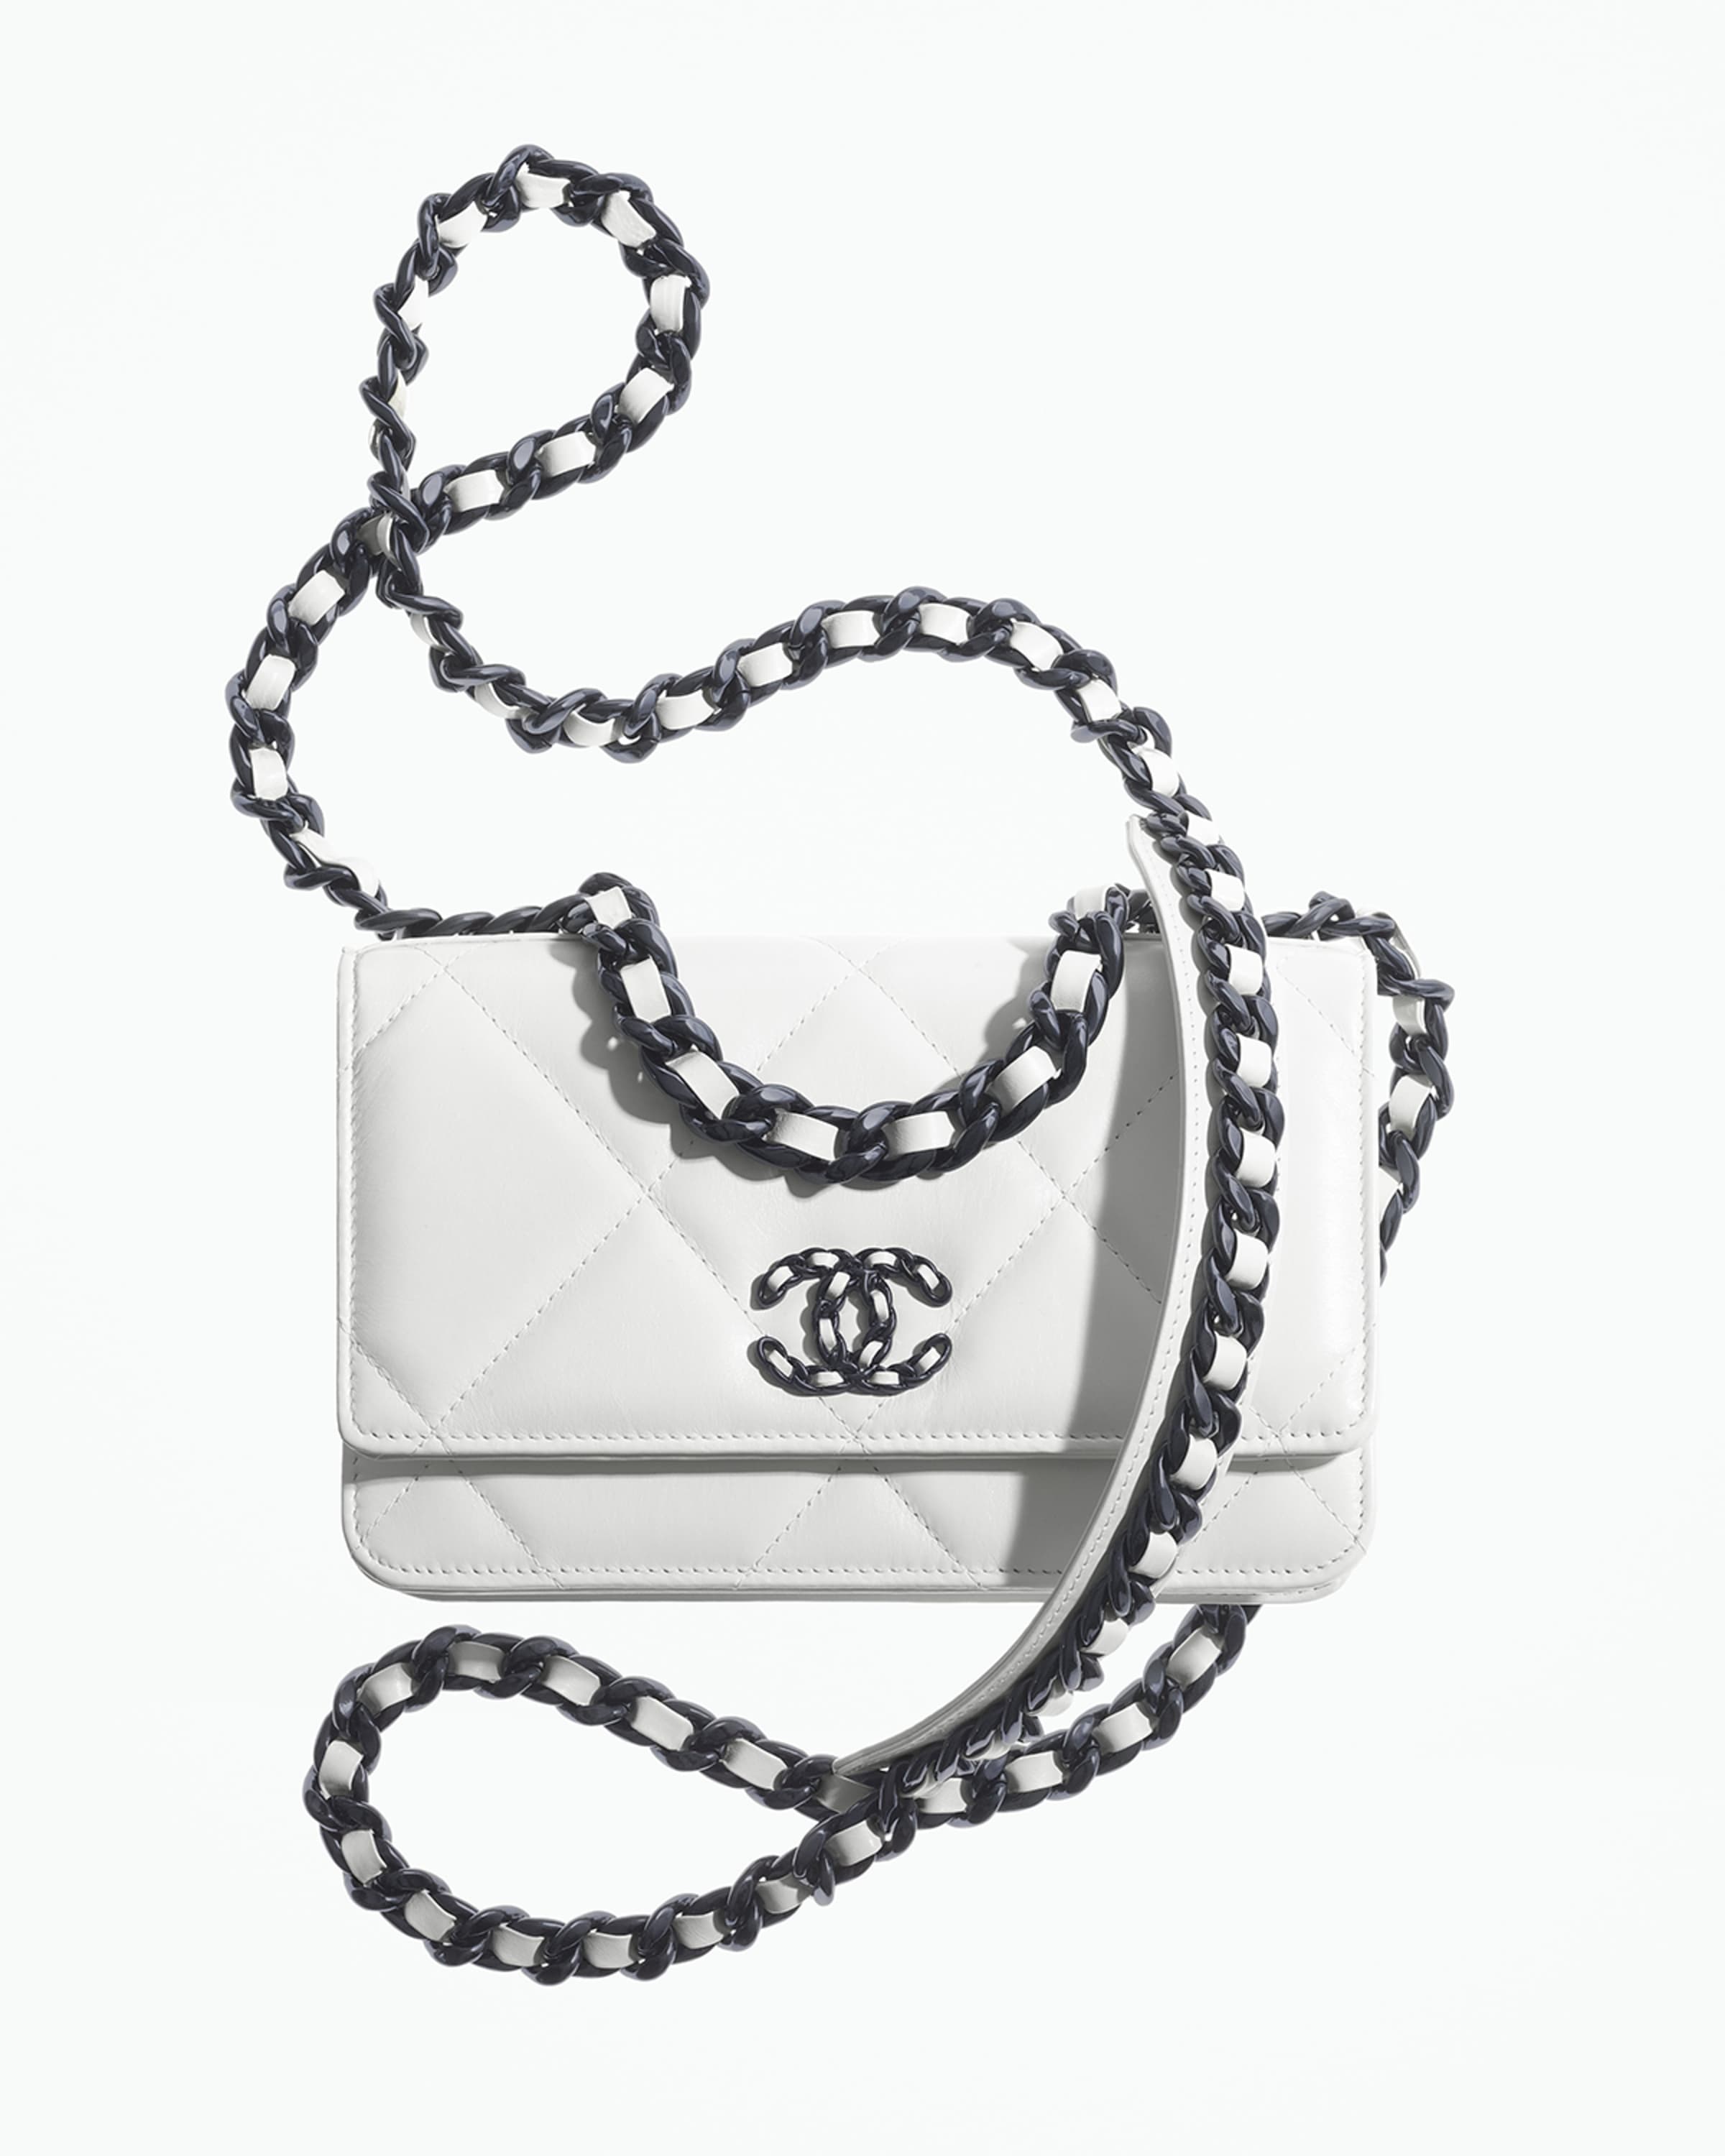 CHANEL CHANEL 19 WALLET ON CHAIN